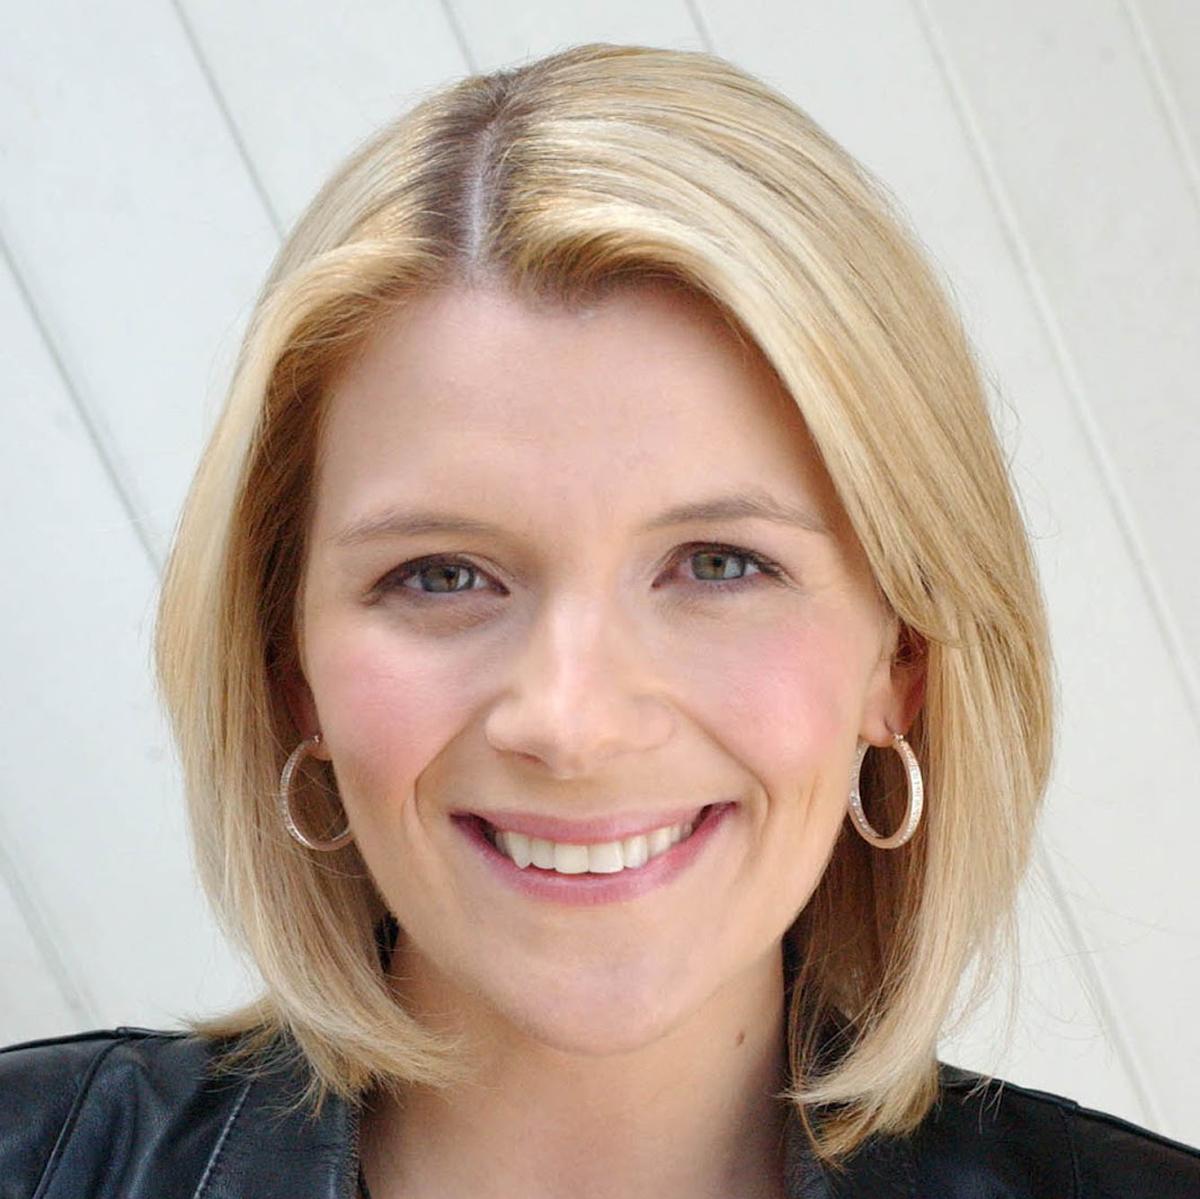 Jane Danson, the British actress who plays Leanne Battersby in ITV’s <i>Coronation Street</i> soap opera used to visit the spa / coronationstreetupdates.blogspot.com